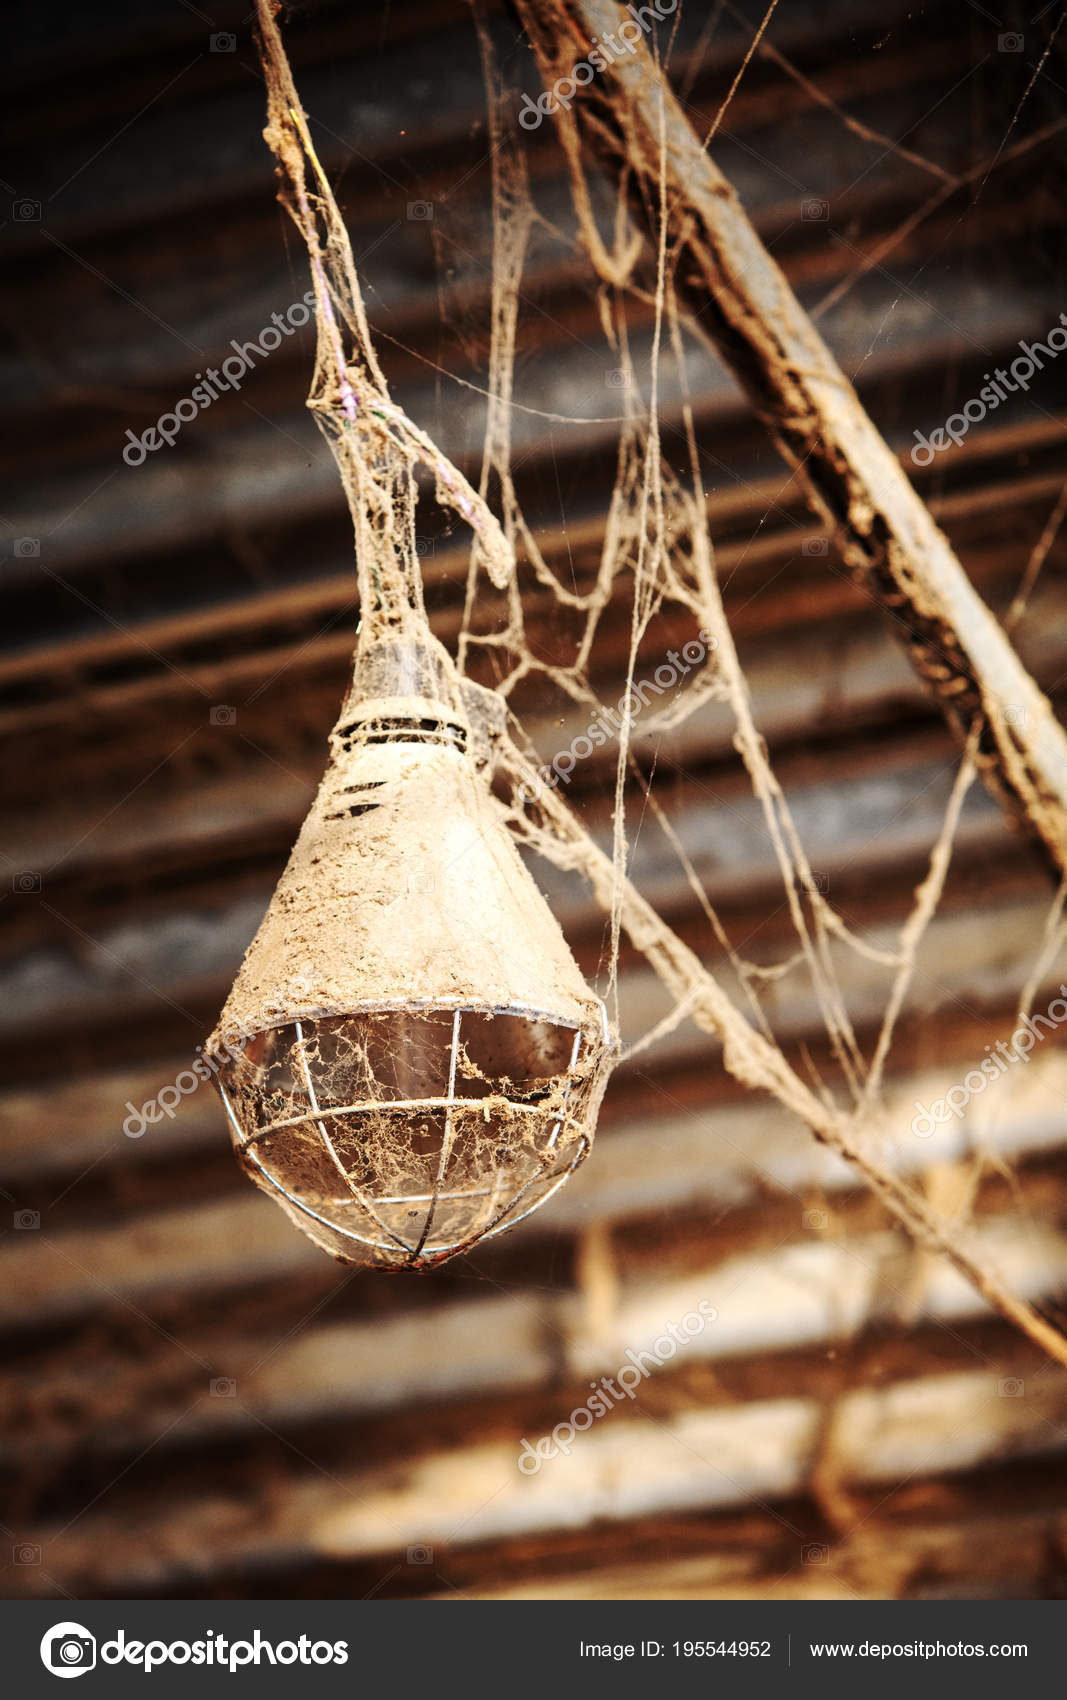 Rusty lamp hanging from ceiling with spiderwebs — Stock Photo ©  wernerimages #195544952